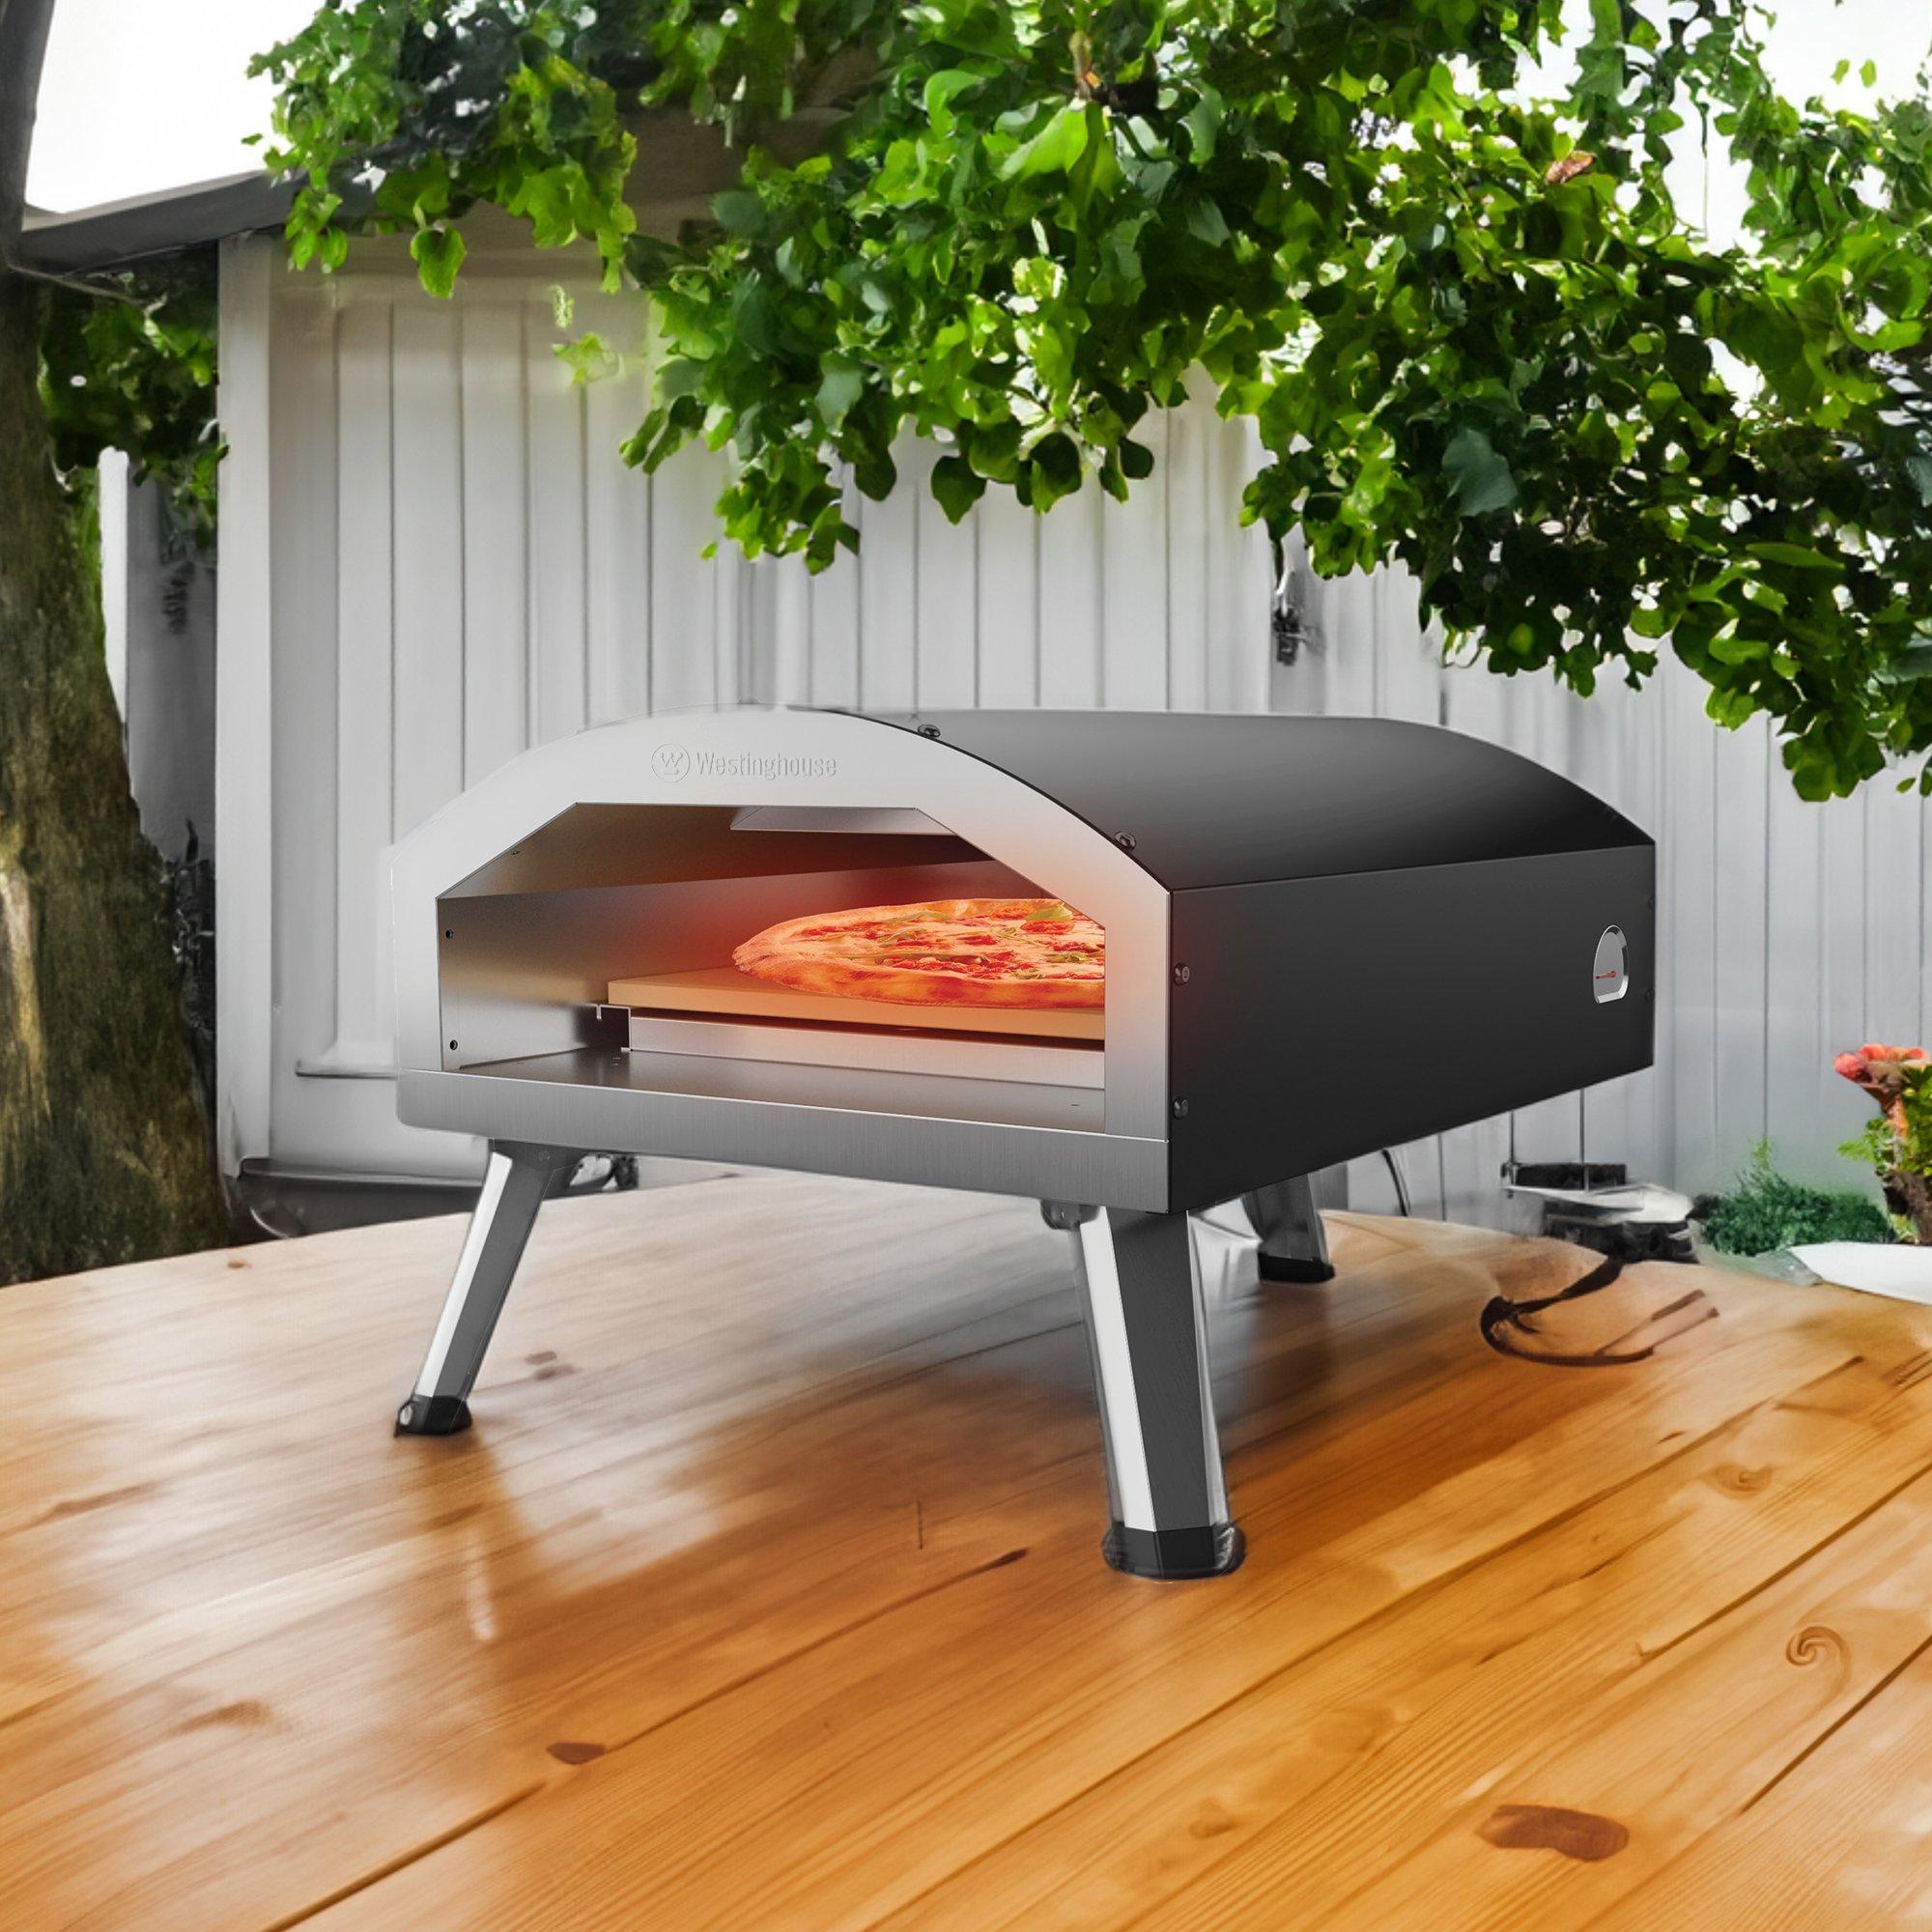 Westinghouse 12 Inch Pizza Oven For Indoor And Outdoor Use